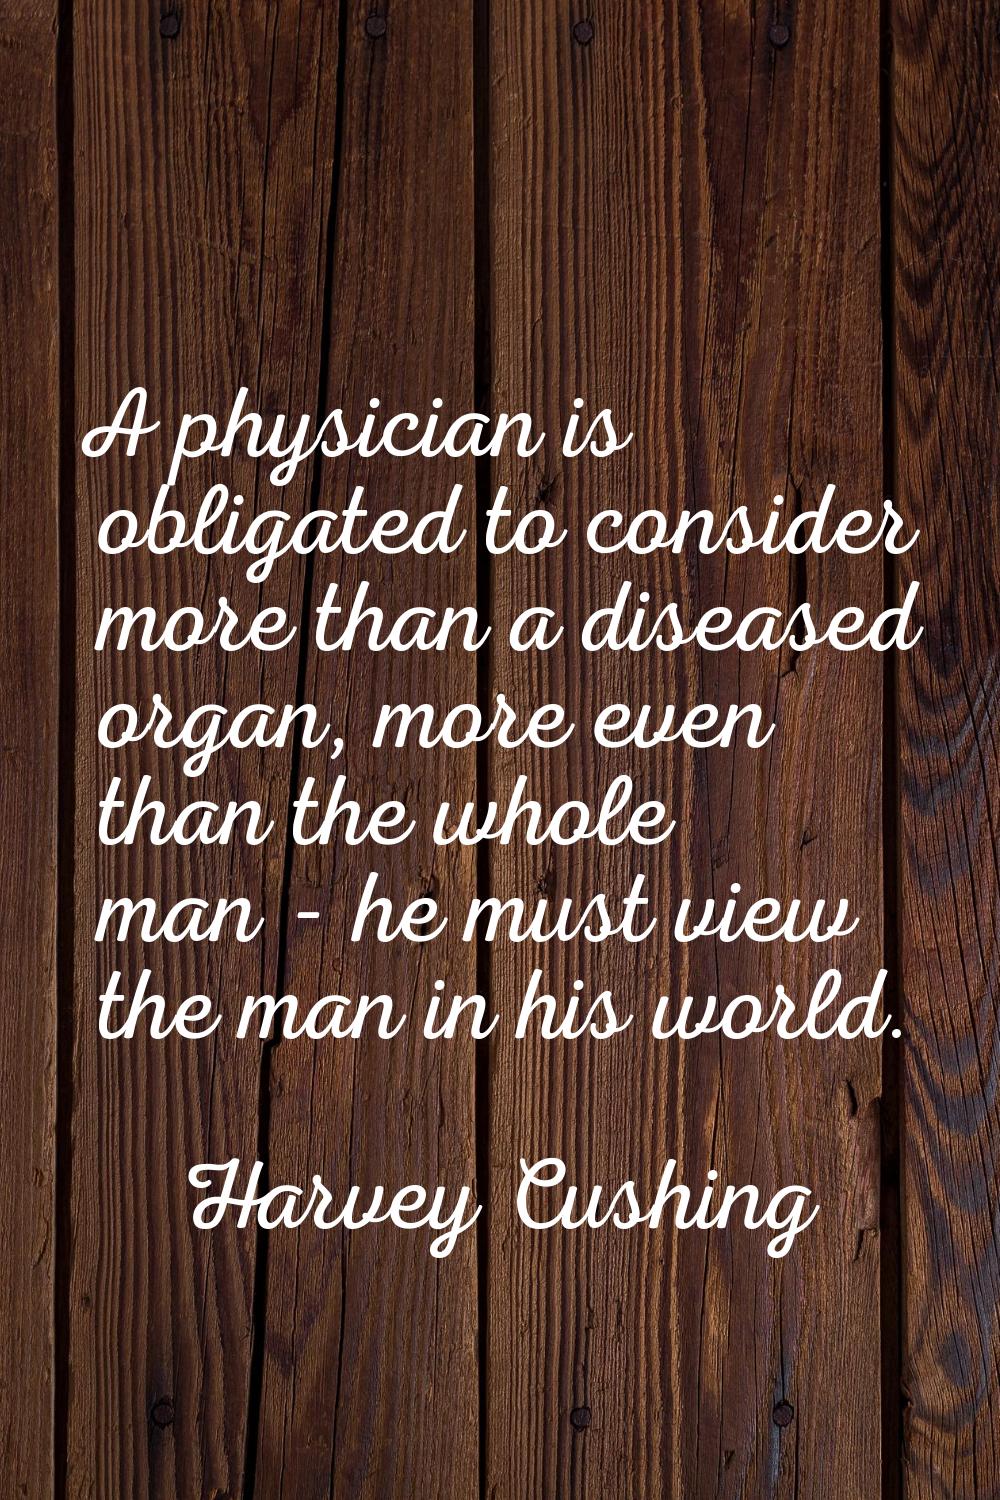 A physician is obligated to consider more than a diseased organ, more even than the whole man - he 